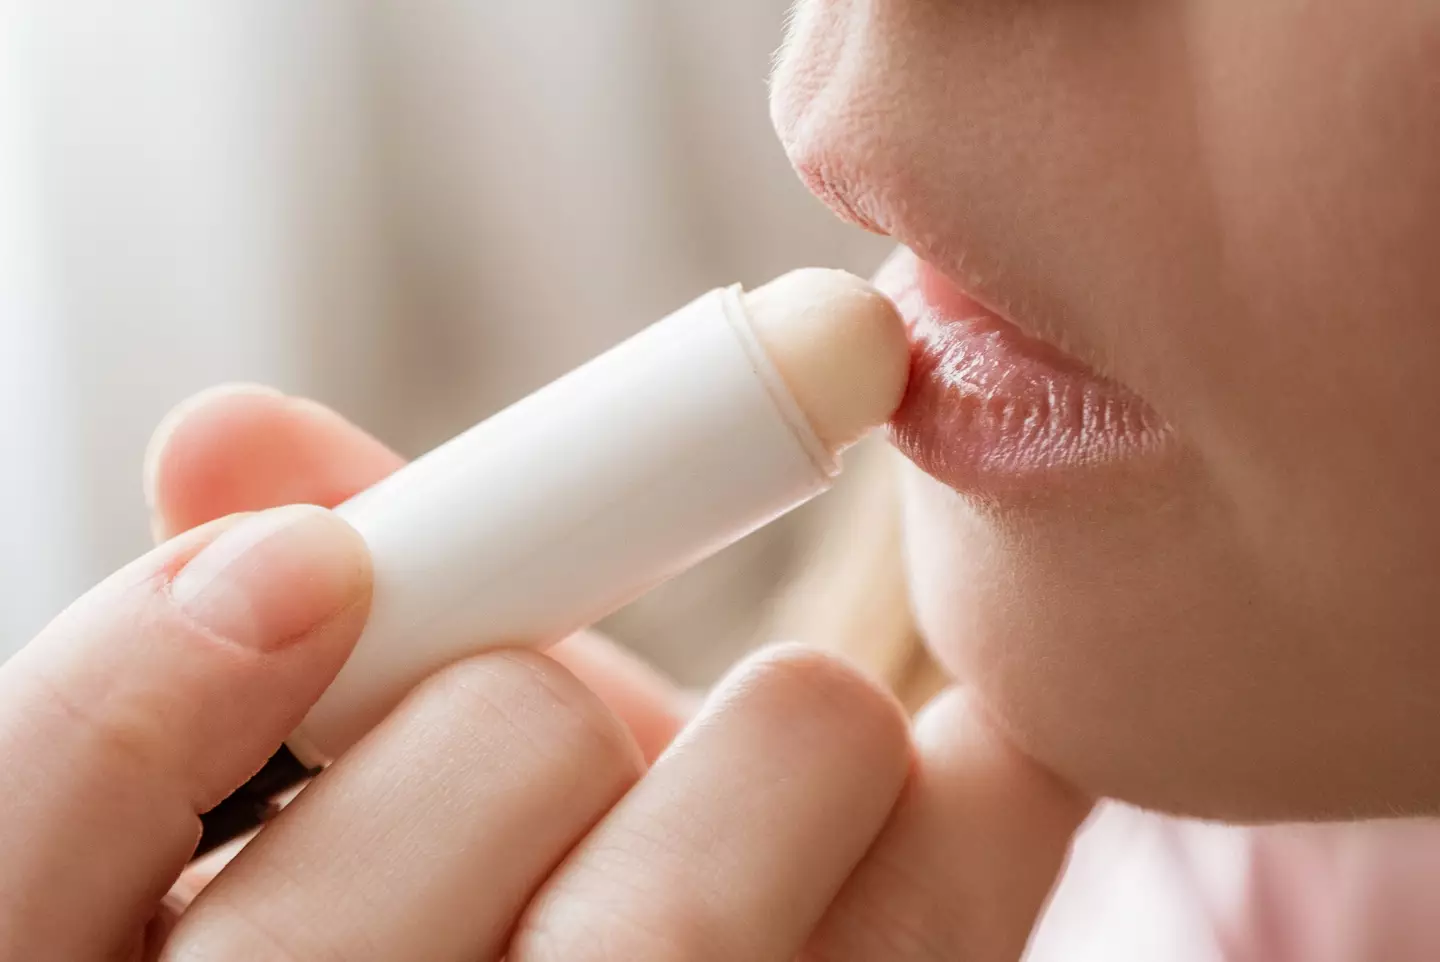 Be sure to pop on some lip balm to help prevent chapping and cracking.